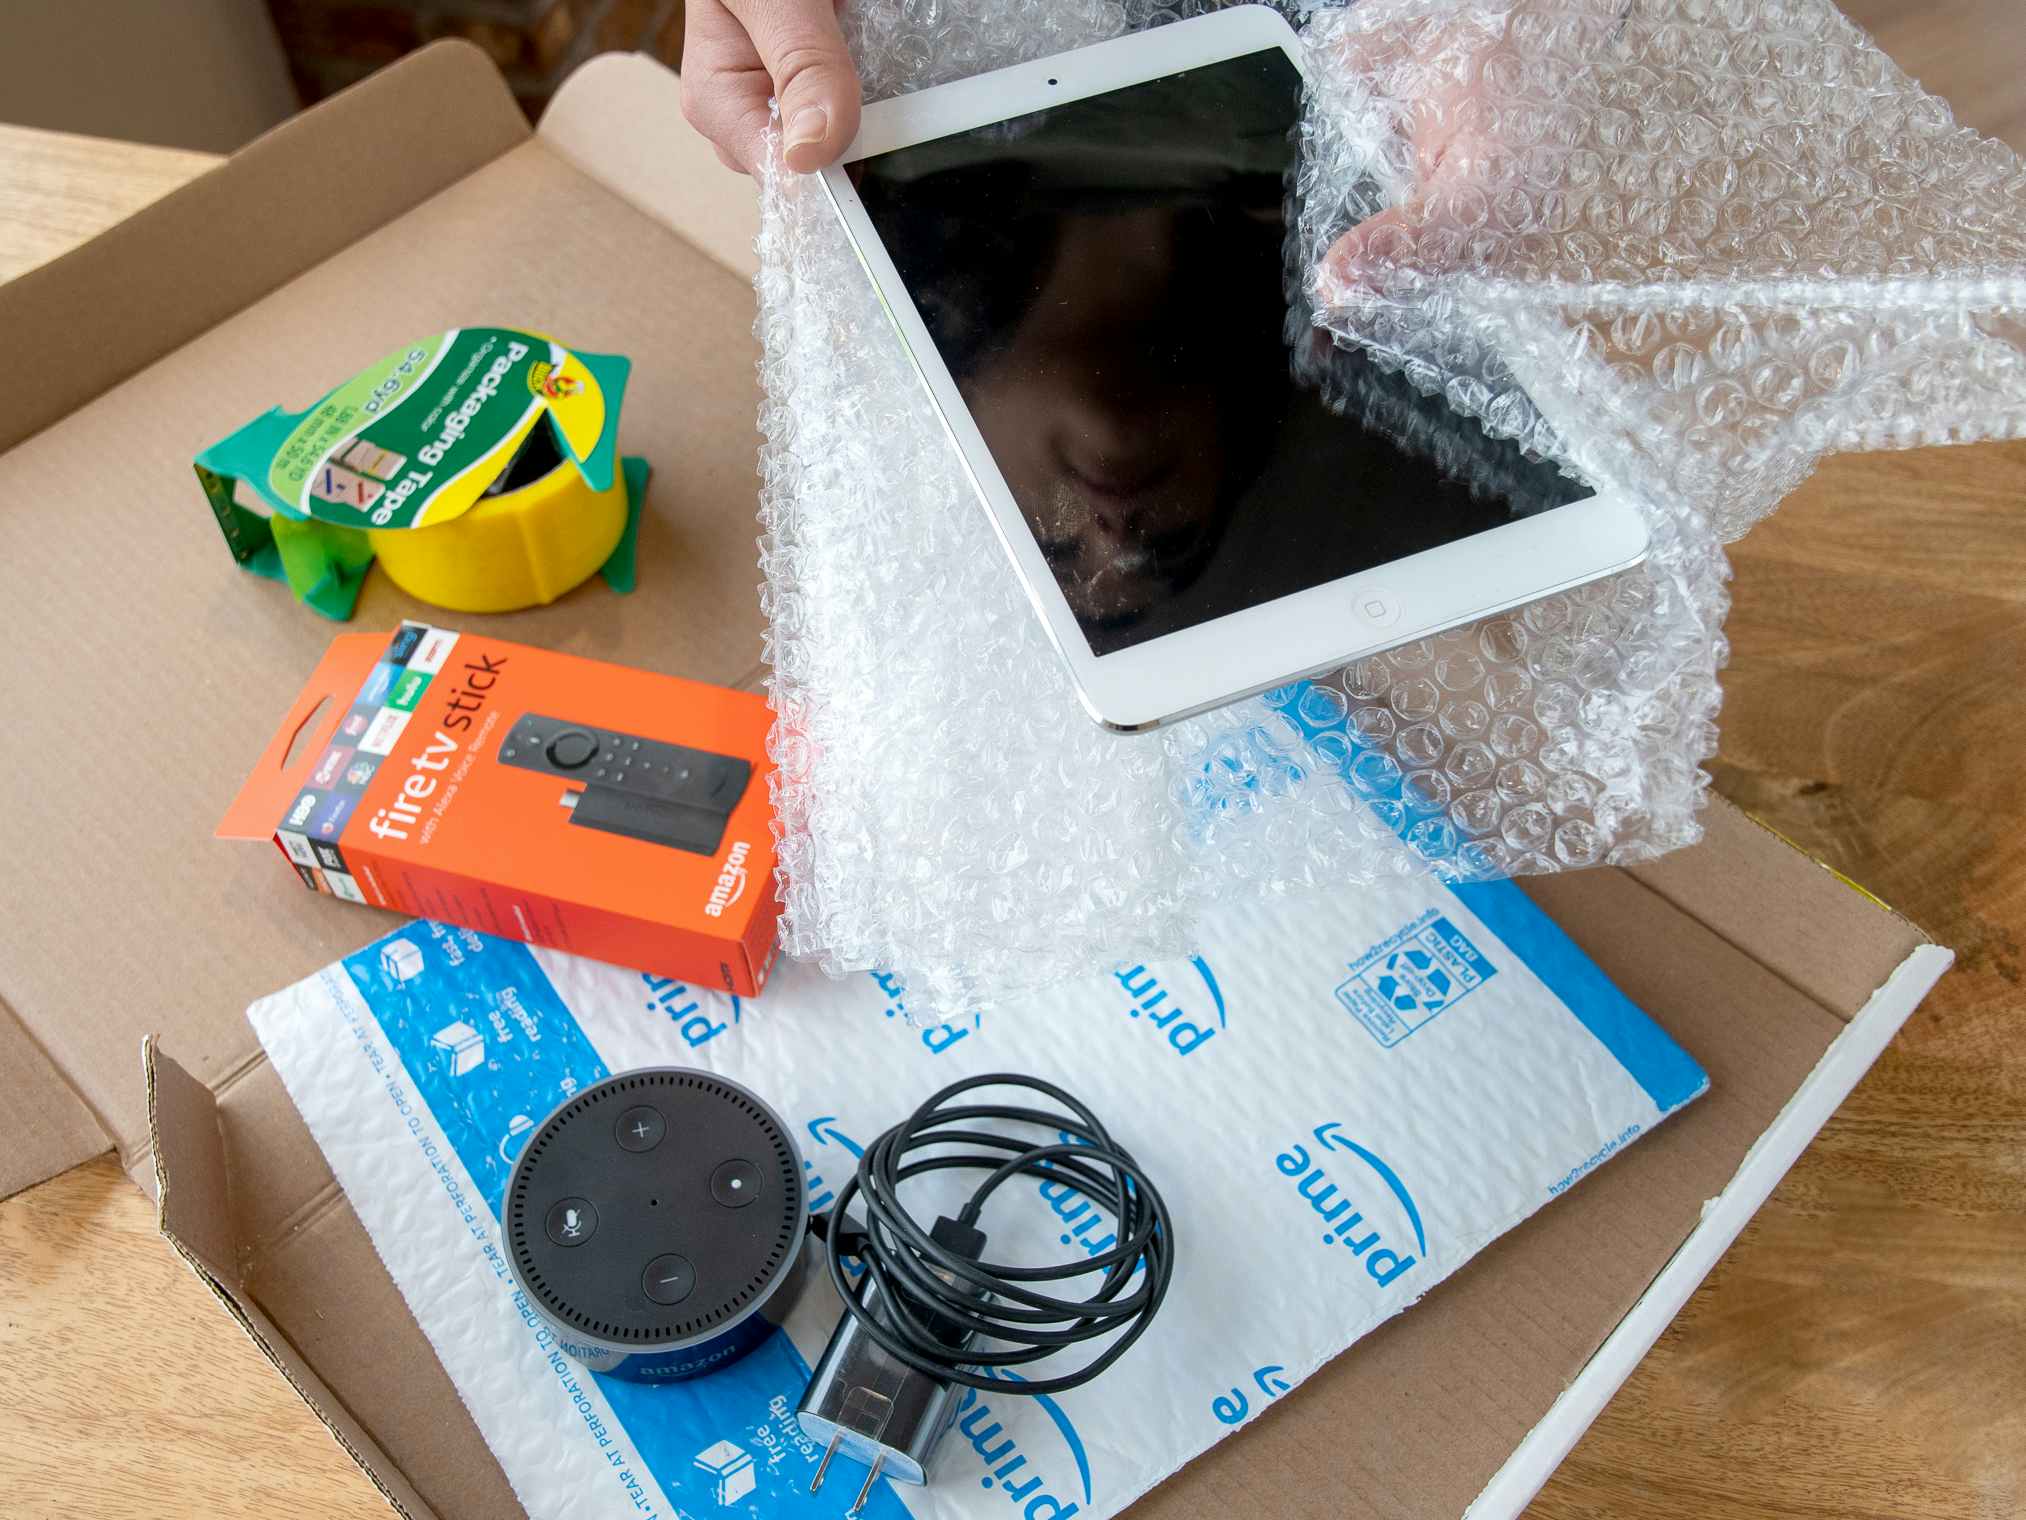 An iPad, Amazon Fire stick, and Amazon Echo dot being boxed up to ship